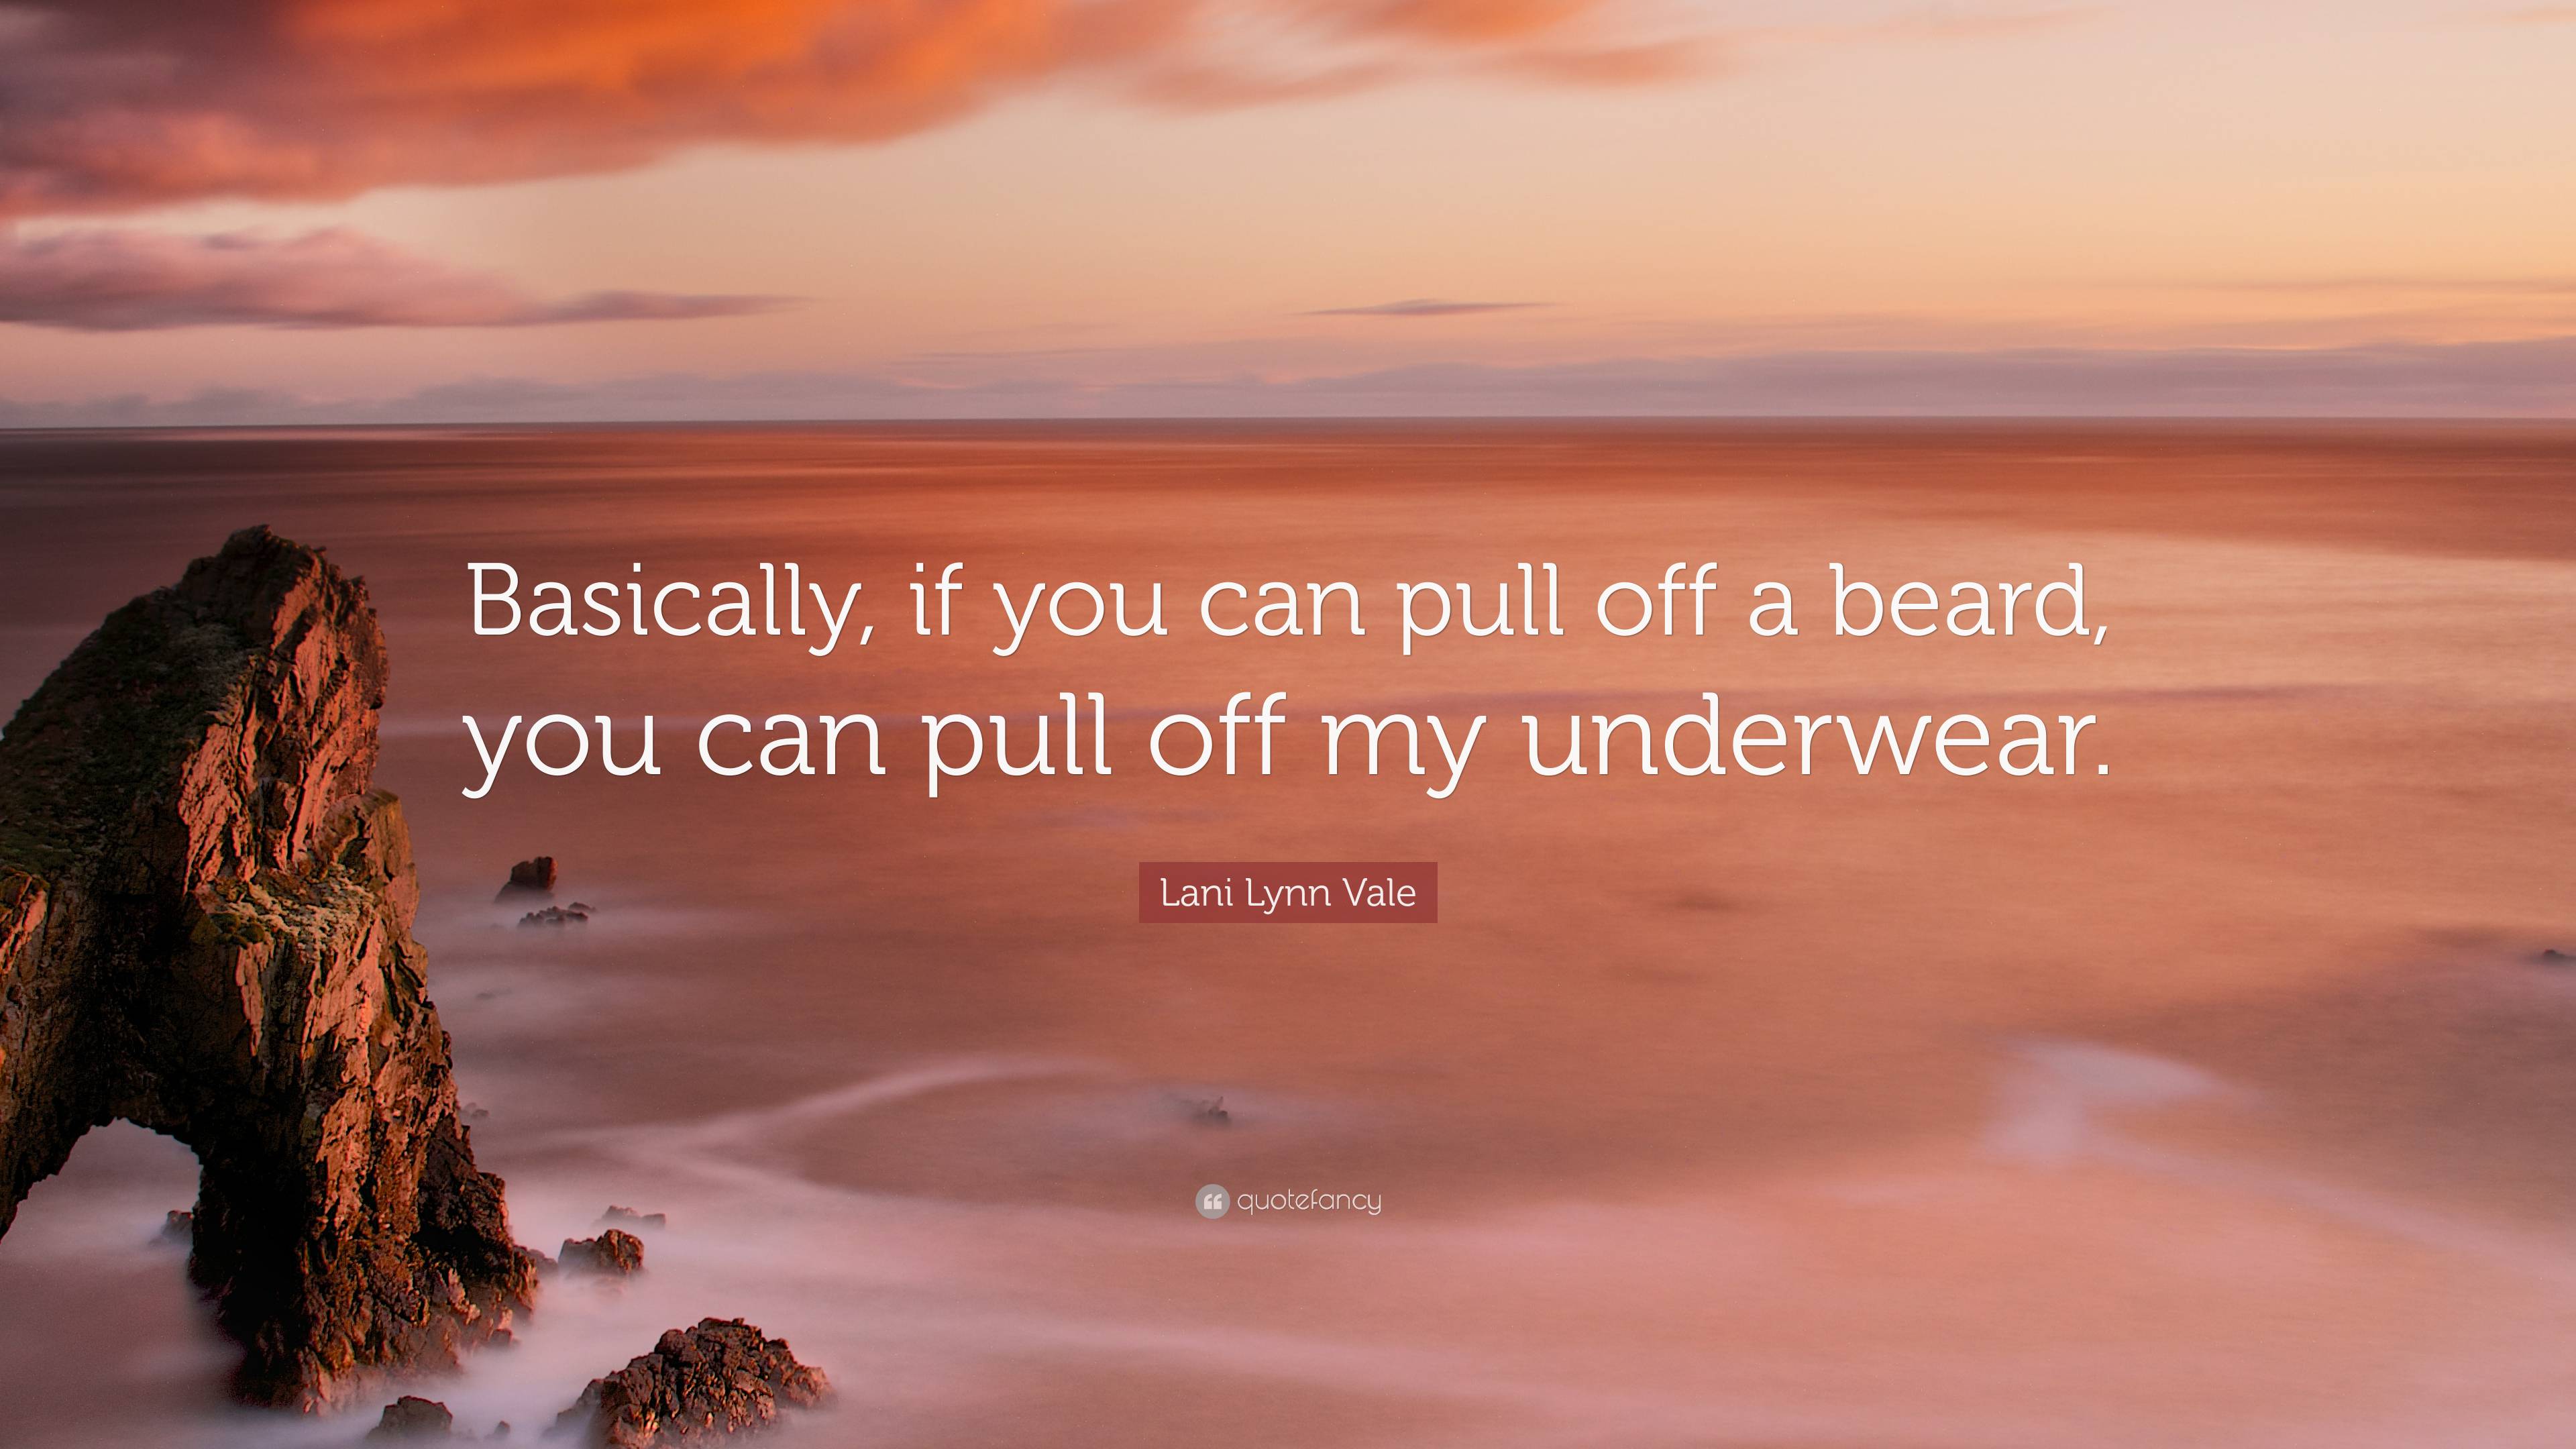 Lani Lynn Vale Quote: “Basically, if you can pull off a beard, you can pull  off